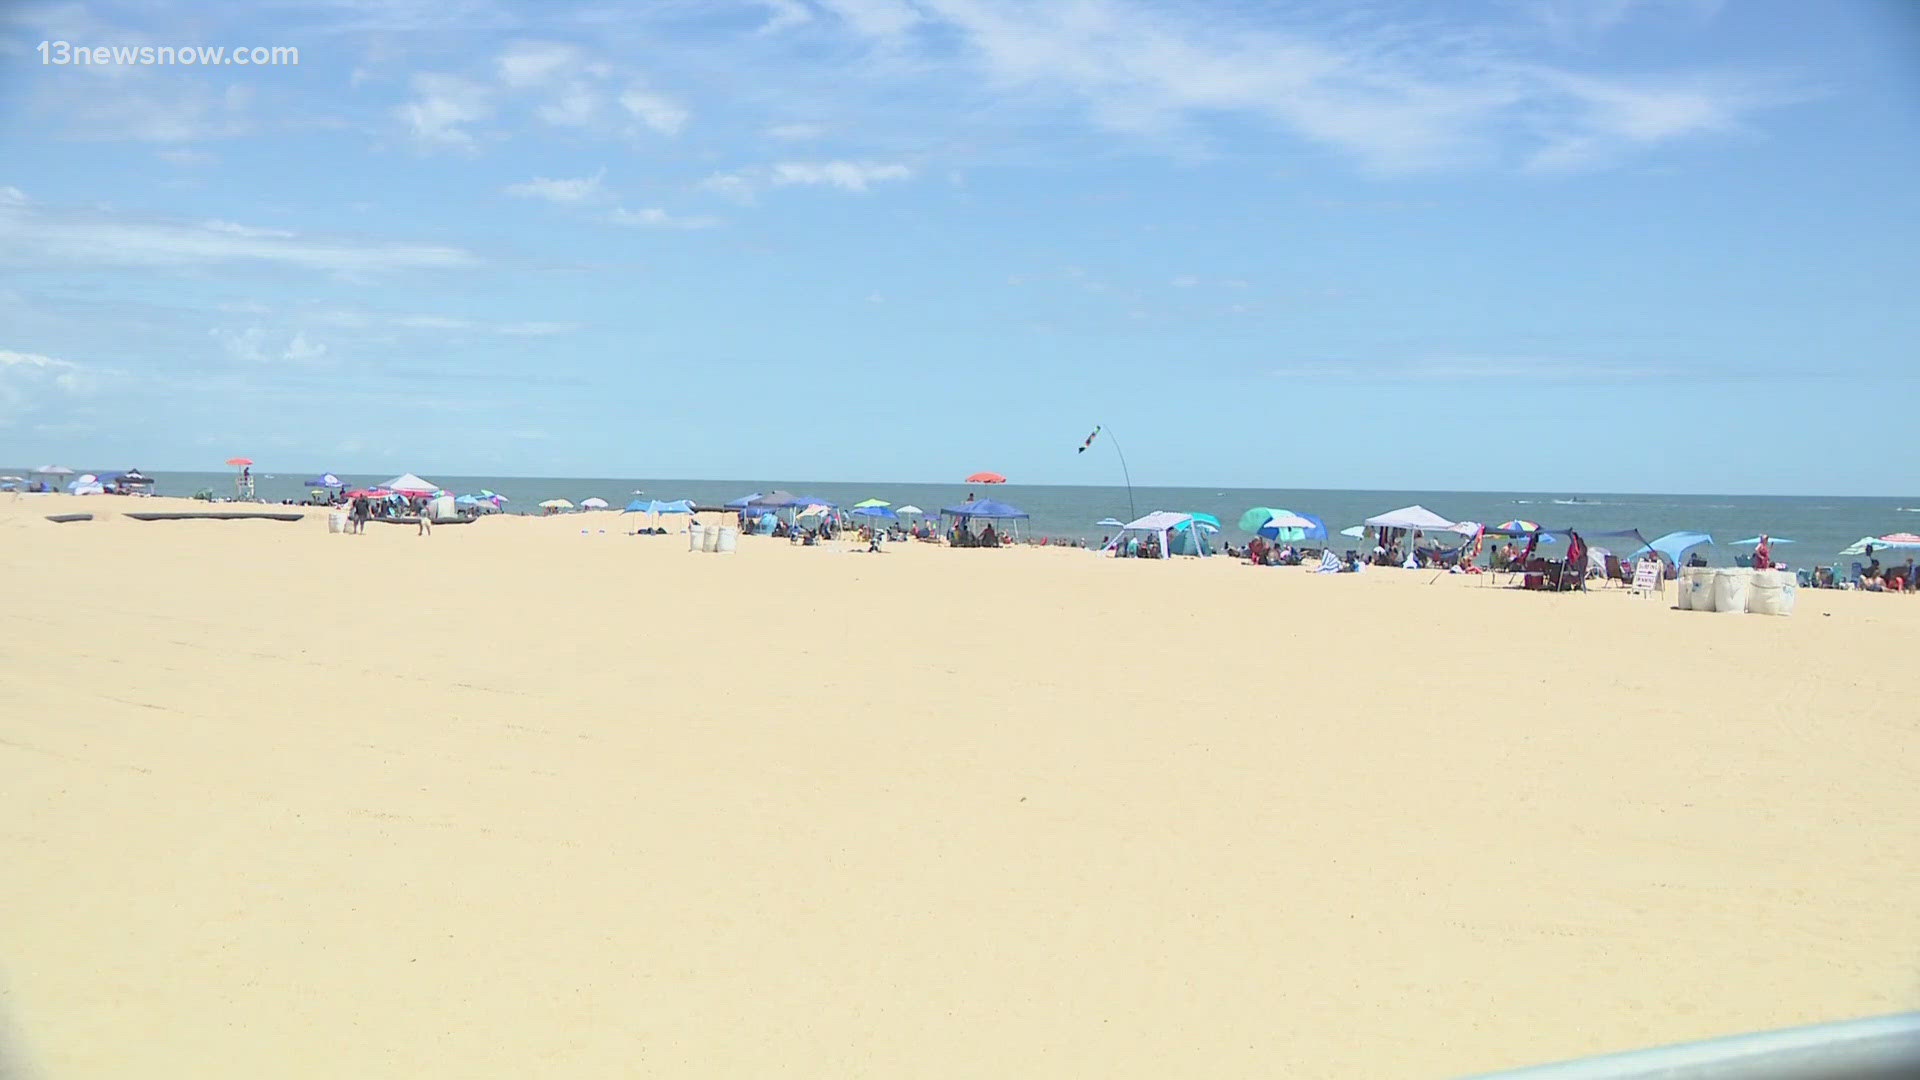 This comes as thousands of people are getting ready to visit Hampton Roads beaches tomorrow on the Fourth of July.